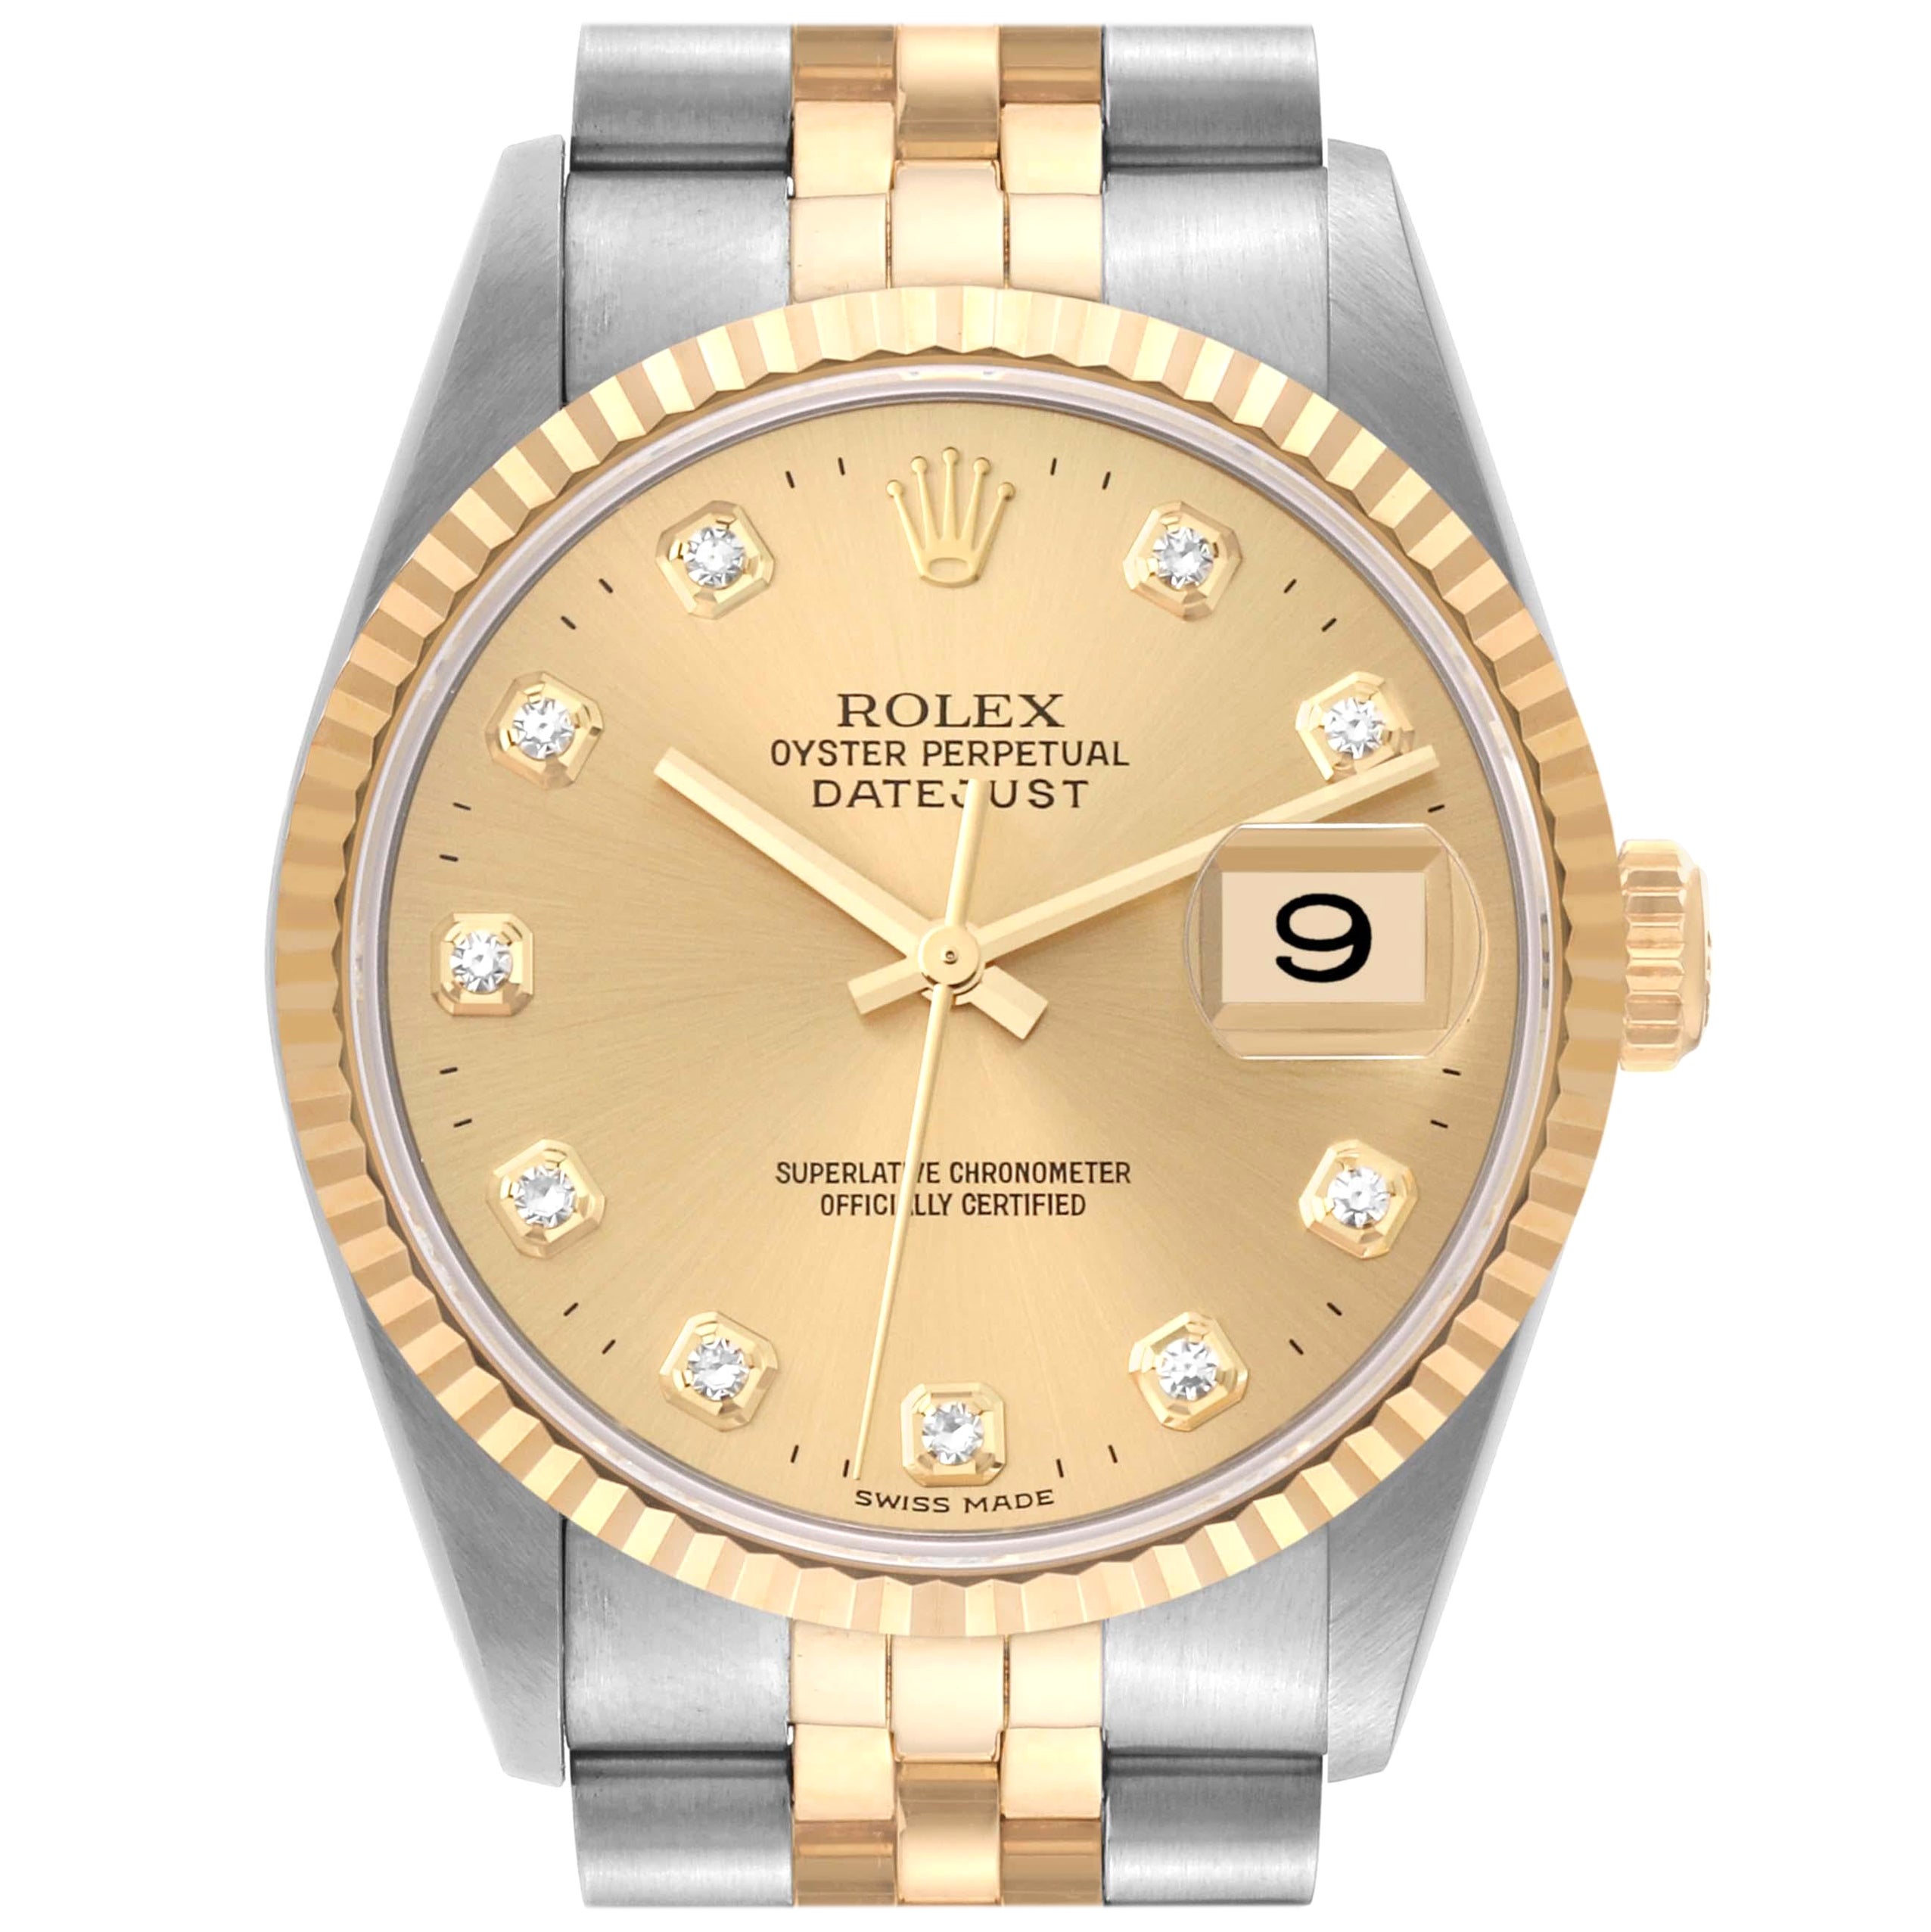 Are Rolex watches battery-powered?